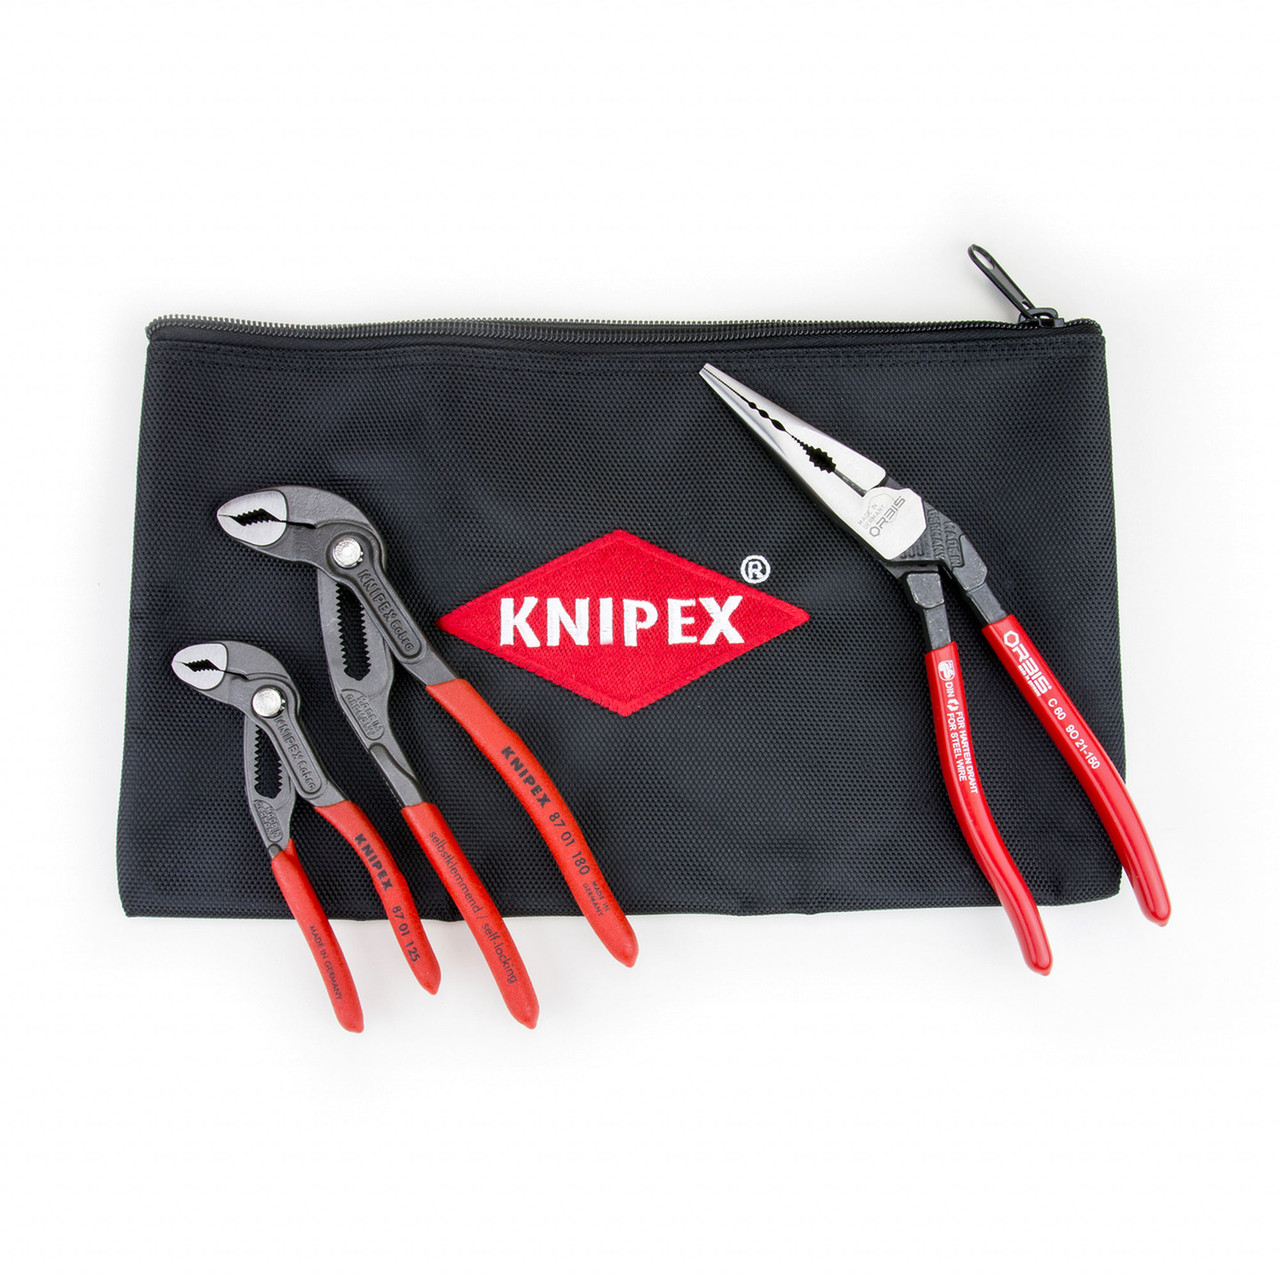 Knipex 9K 00 80 123 US 3 Pc Orbis and Cobra® Set w/ Keeper Pouch -  ChadsToolbox.com Inc